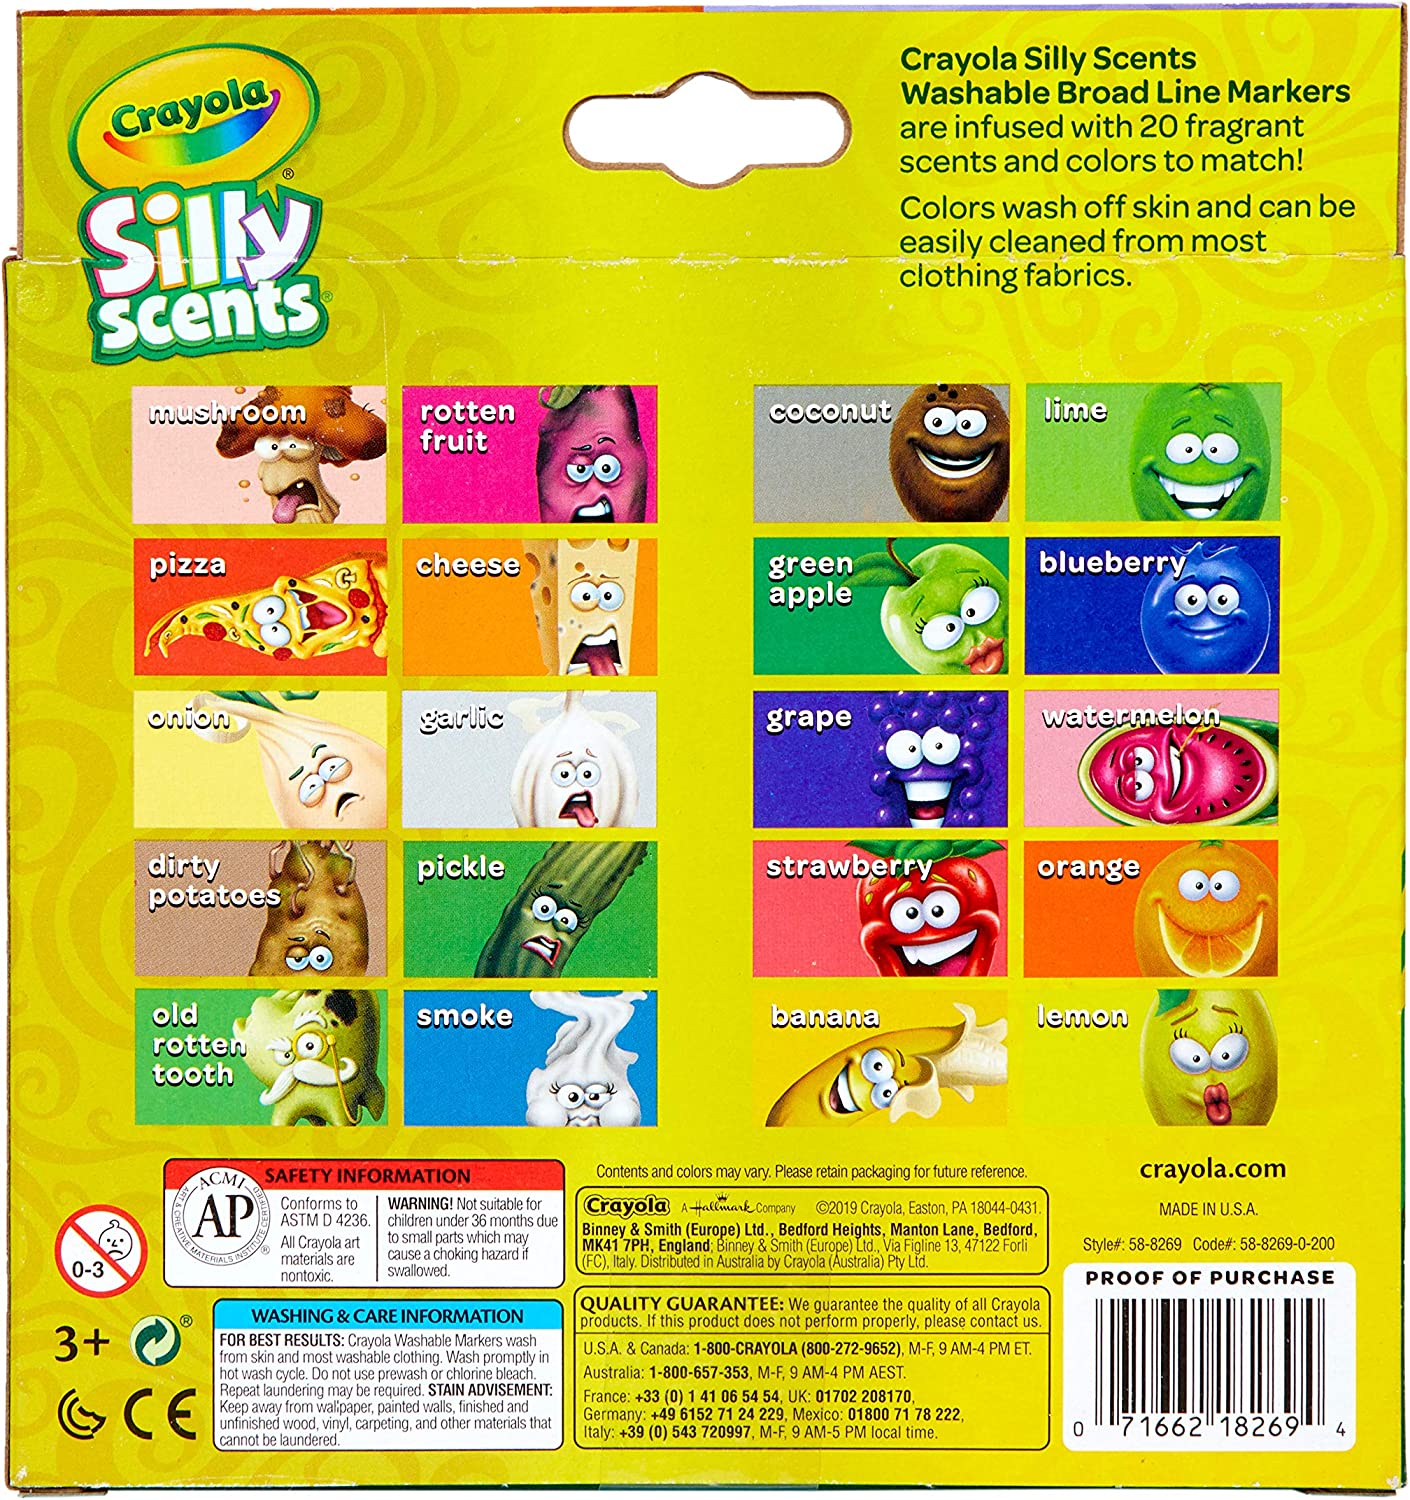 The back of the box and detailed information for Crayola's silly scents markers.